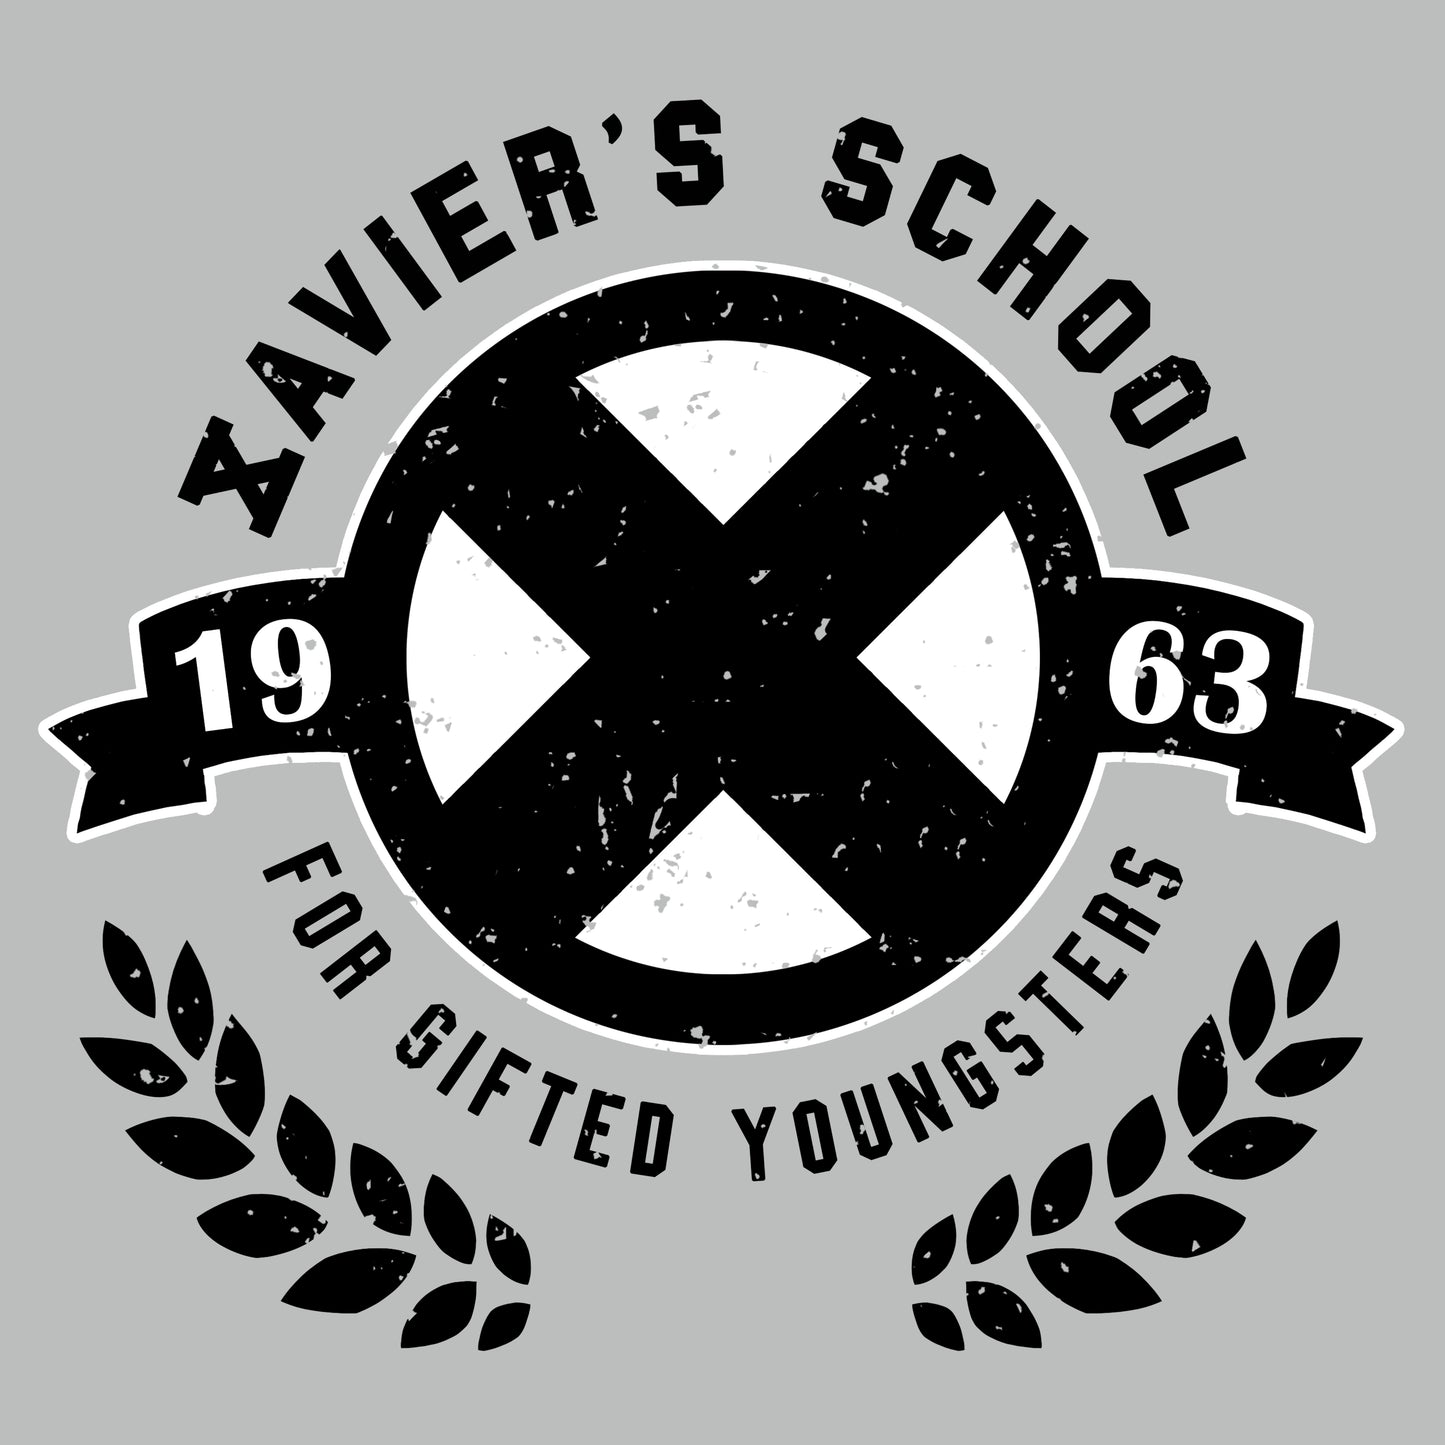 An officially licensed black and white image of Marvel - Deadpool/X-Men's Xavier's School for Gifted Youngsters logo, invoking mutant alumnus pride.